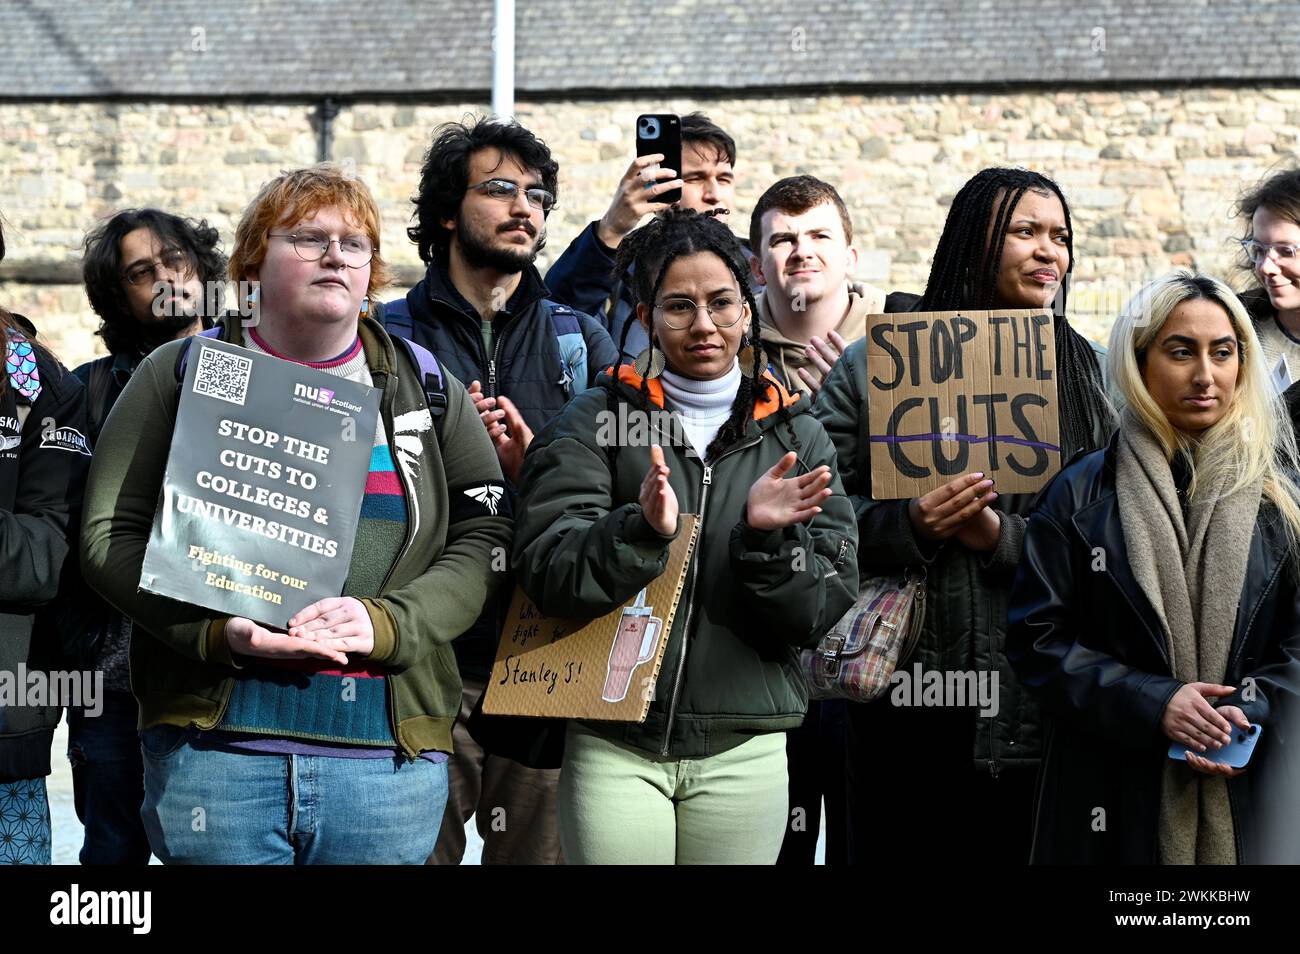 Edinburgh, Scotland, UK. 21st February 2024. NUS Rally for education outside the Scottish parliament, protesting against the Scottish Government which plans to cut the budgets of Colleges and Universities by more than £100 million.  Speakers include the NUS Scotland President, student leaders, and trade unionists. Credit: Craig Brown/Alamy Live News. Stock Photo